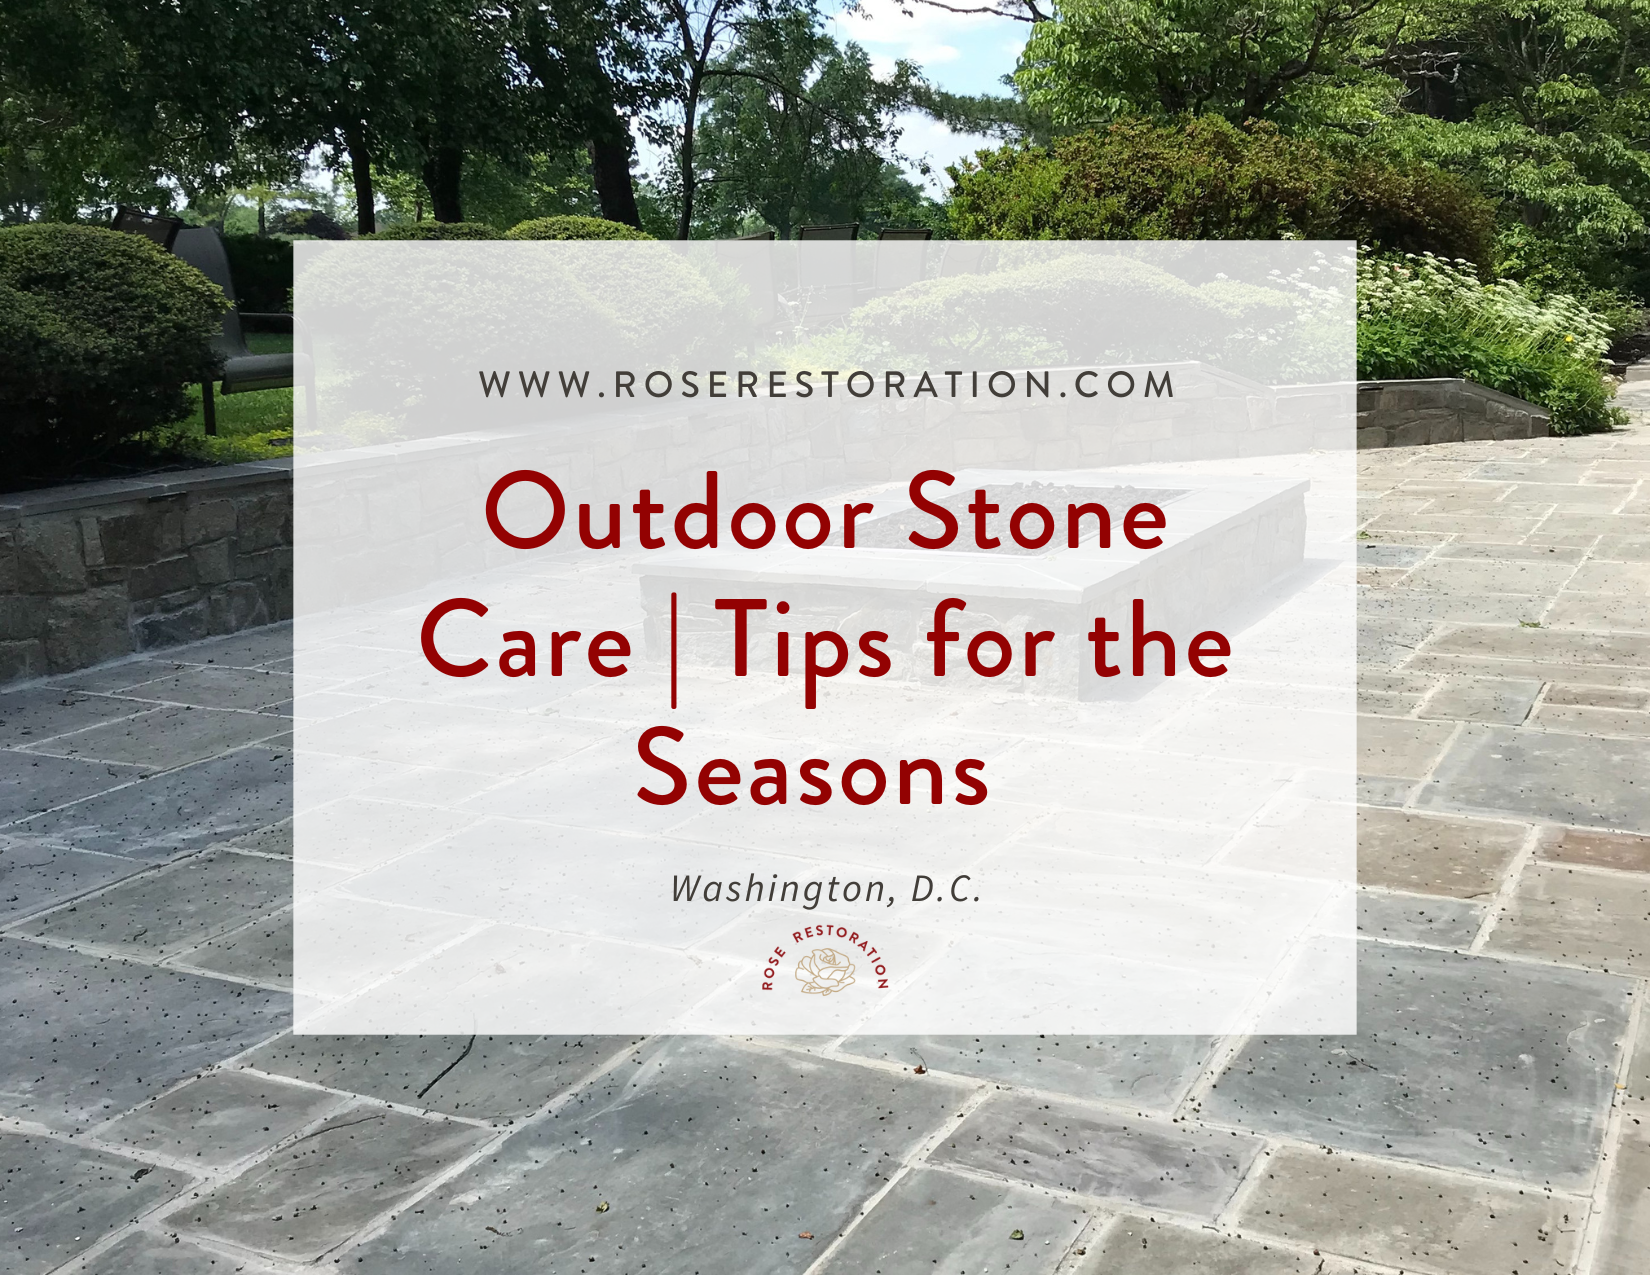 Outdoor Stone Care. Tips for the seasons.